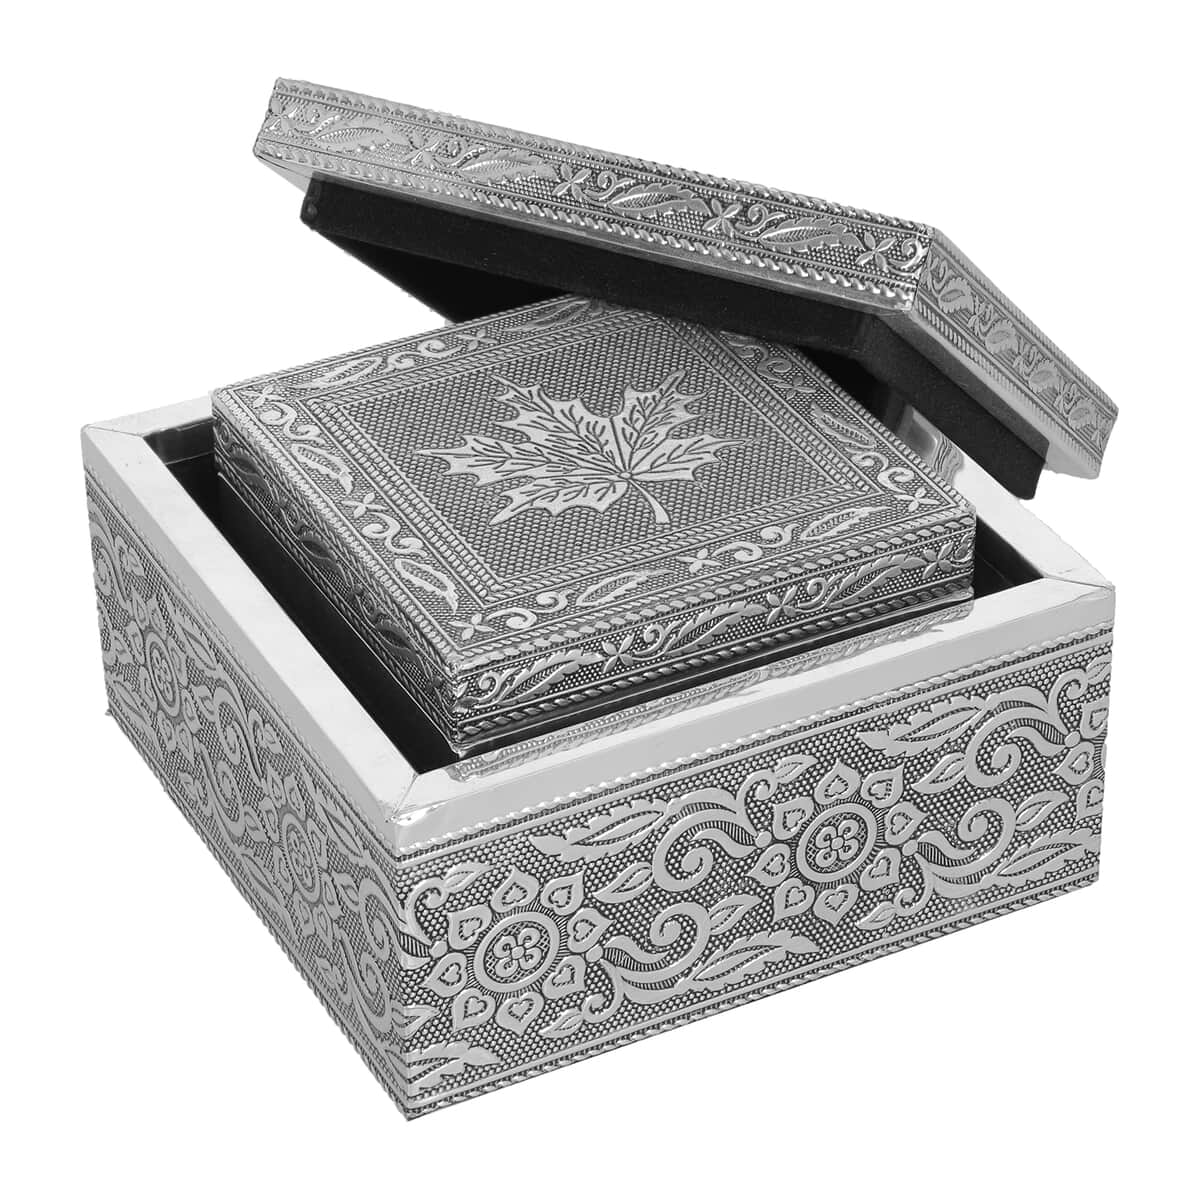 Set of 3 Handcrafted Maple Leafs Embossed Aluminum Oxidized Multi-Purpose Nested Box with Scratch Protection Interior (5,3.5,2.5 in) image number 2